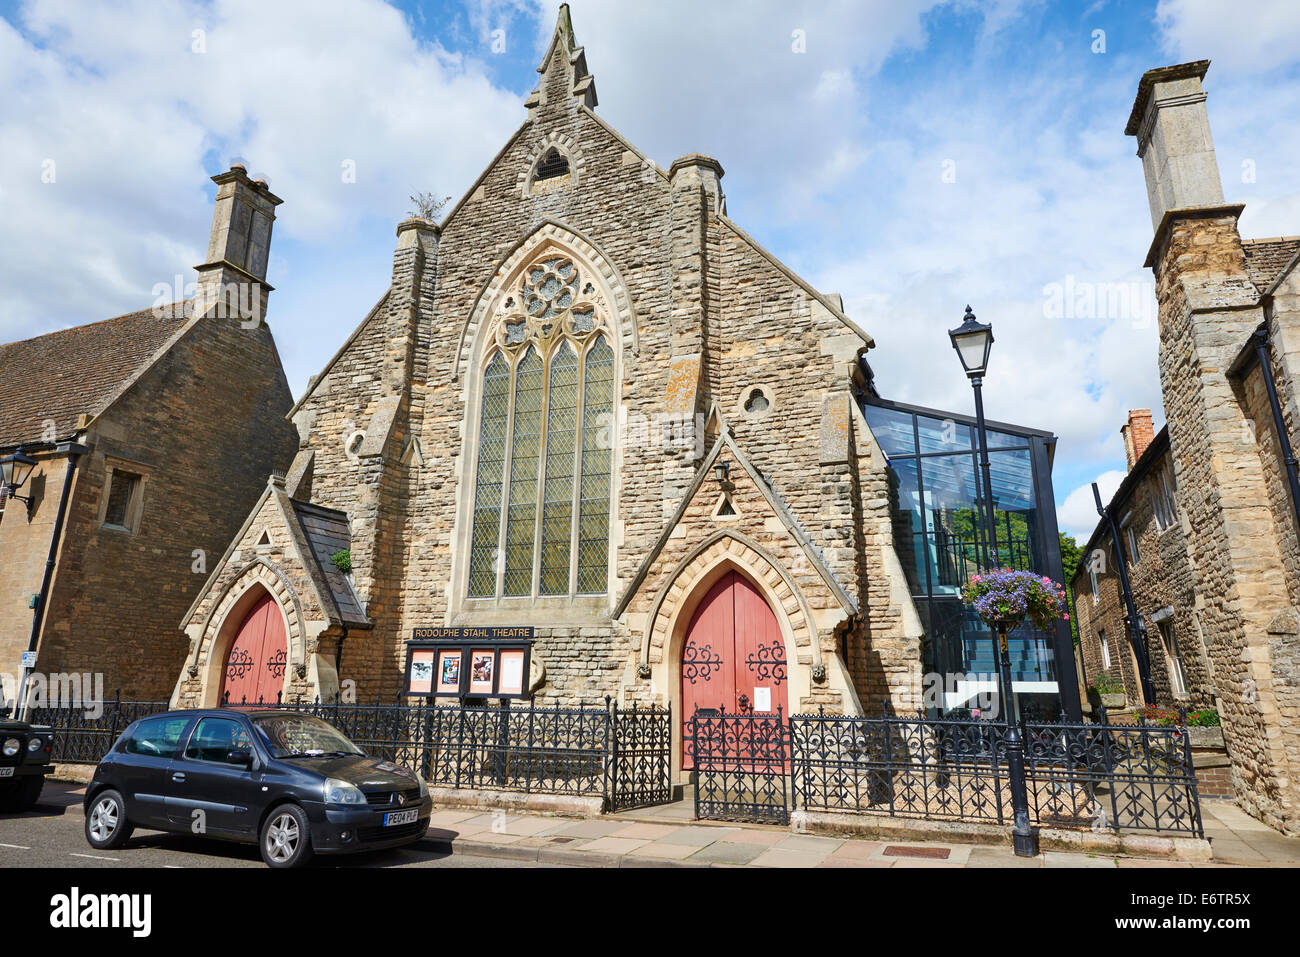 Rodolphe Stahl Theatre A Former Chapel Part Of Oundle School, West Street Oundle Northamptonshire UK Stock Photo